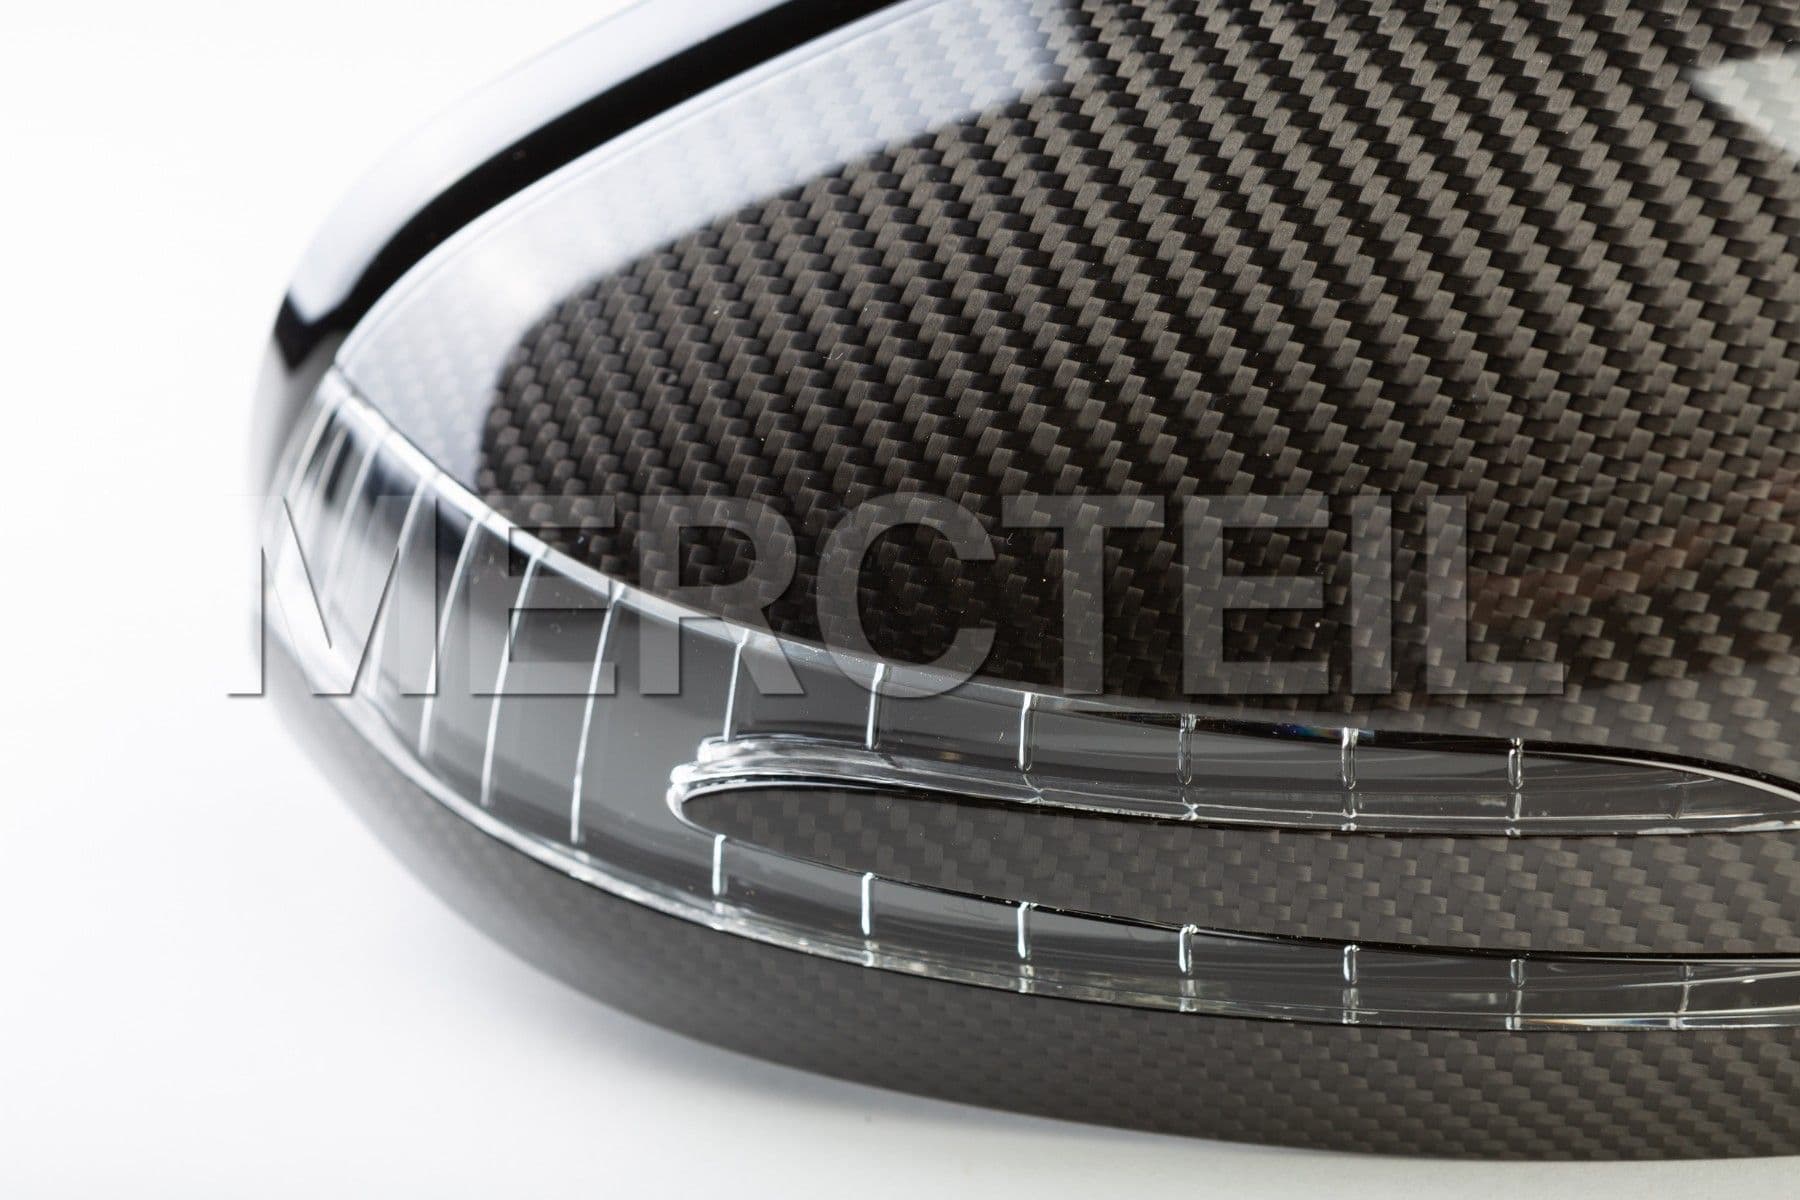 Side Mirror Covers Carbon Fiber for AMG GT & SLS AMG & SL Class (part number: A1978100079)